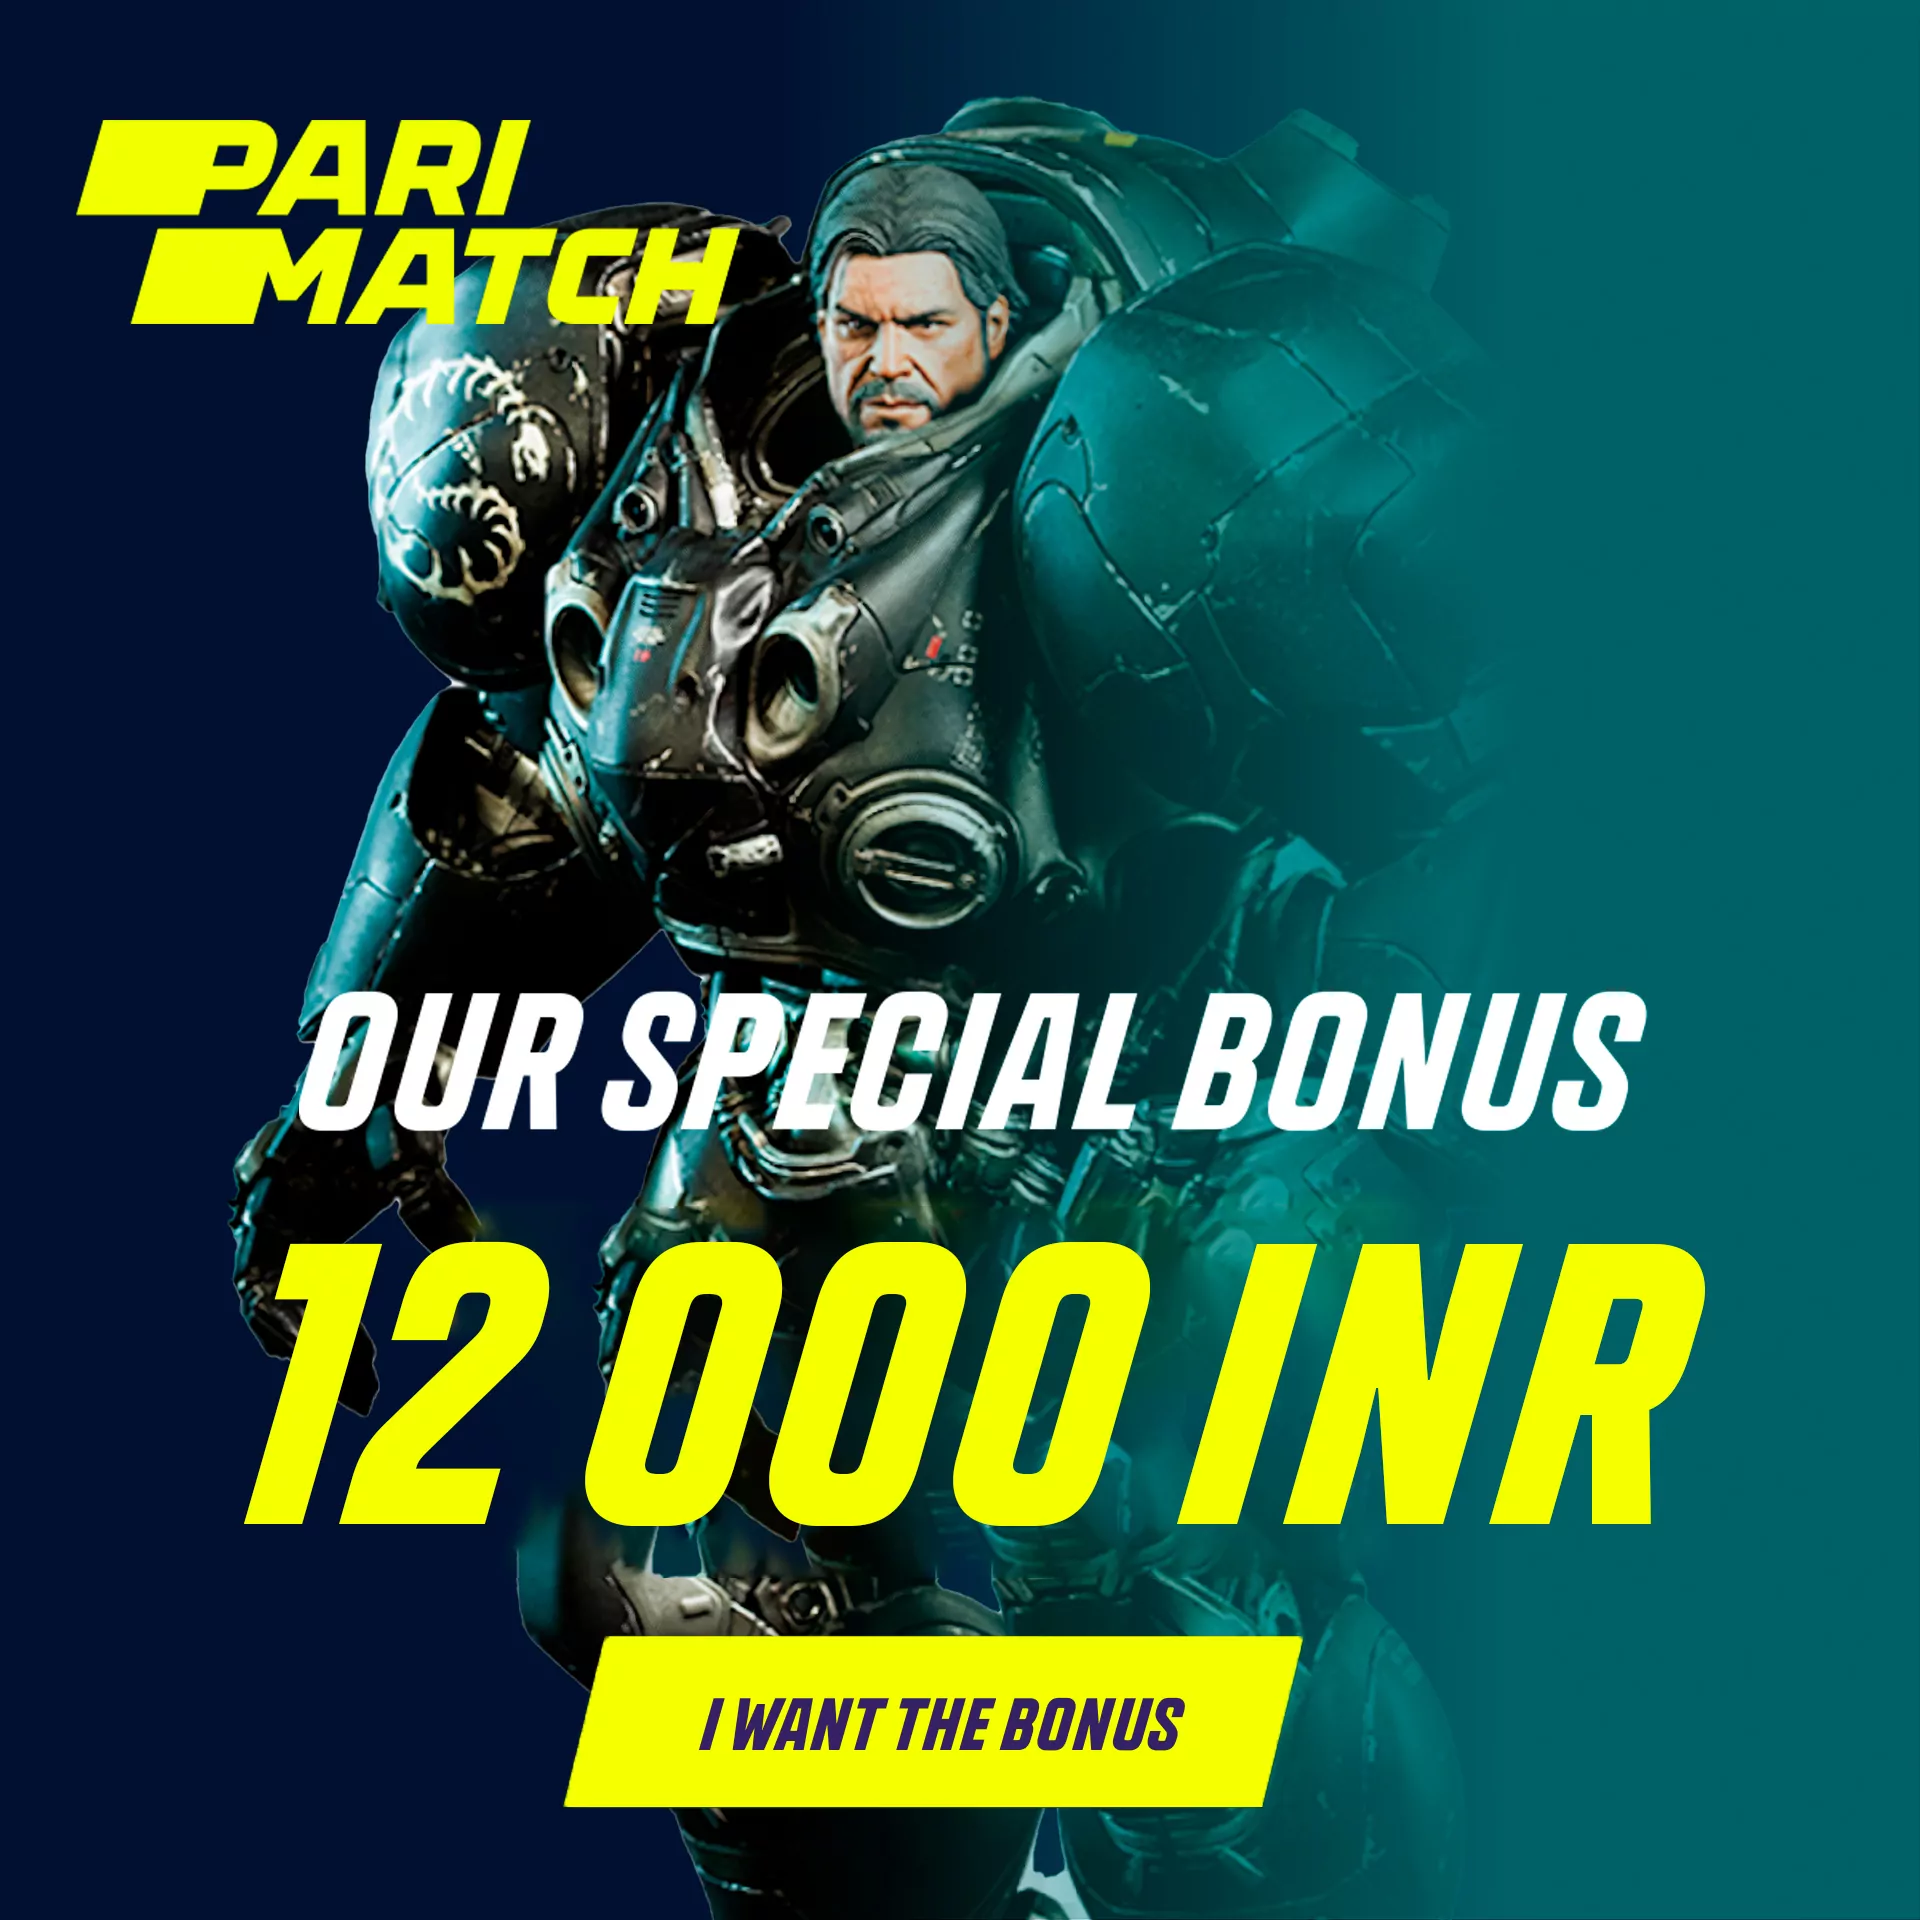 Start betting on StarCraft 2 and get a bonus of 12,000 rupees.